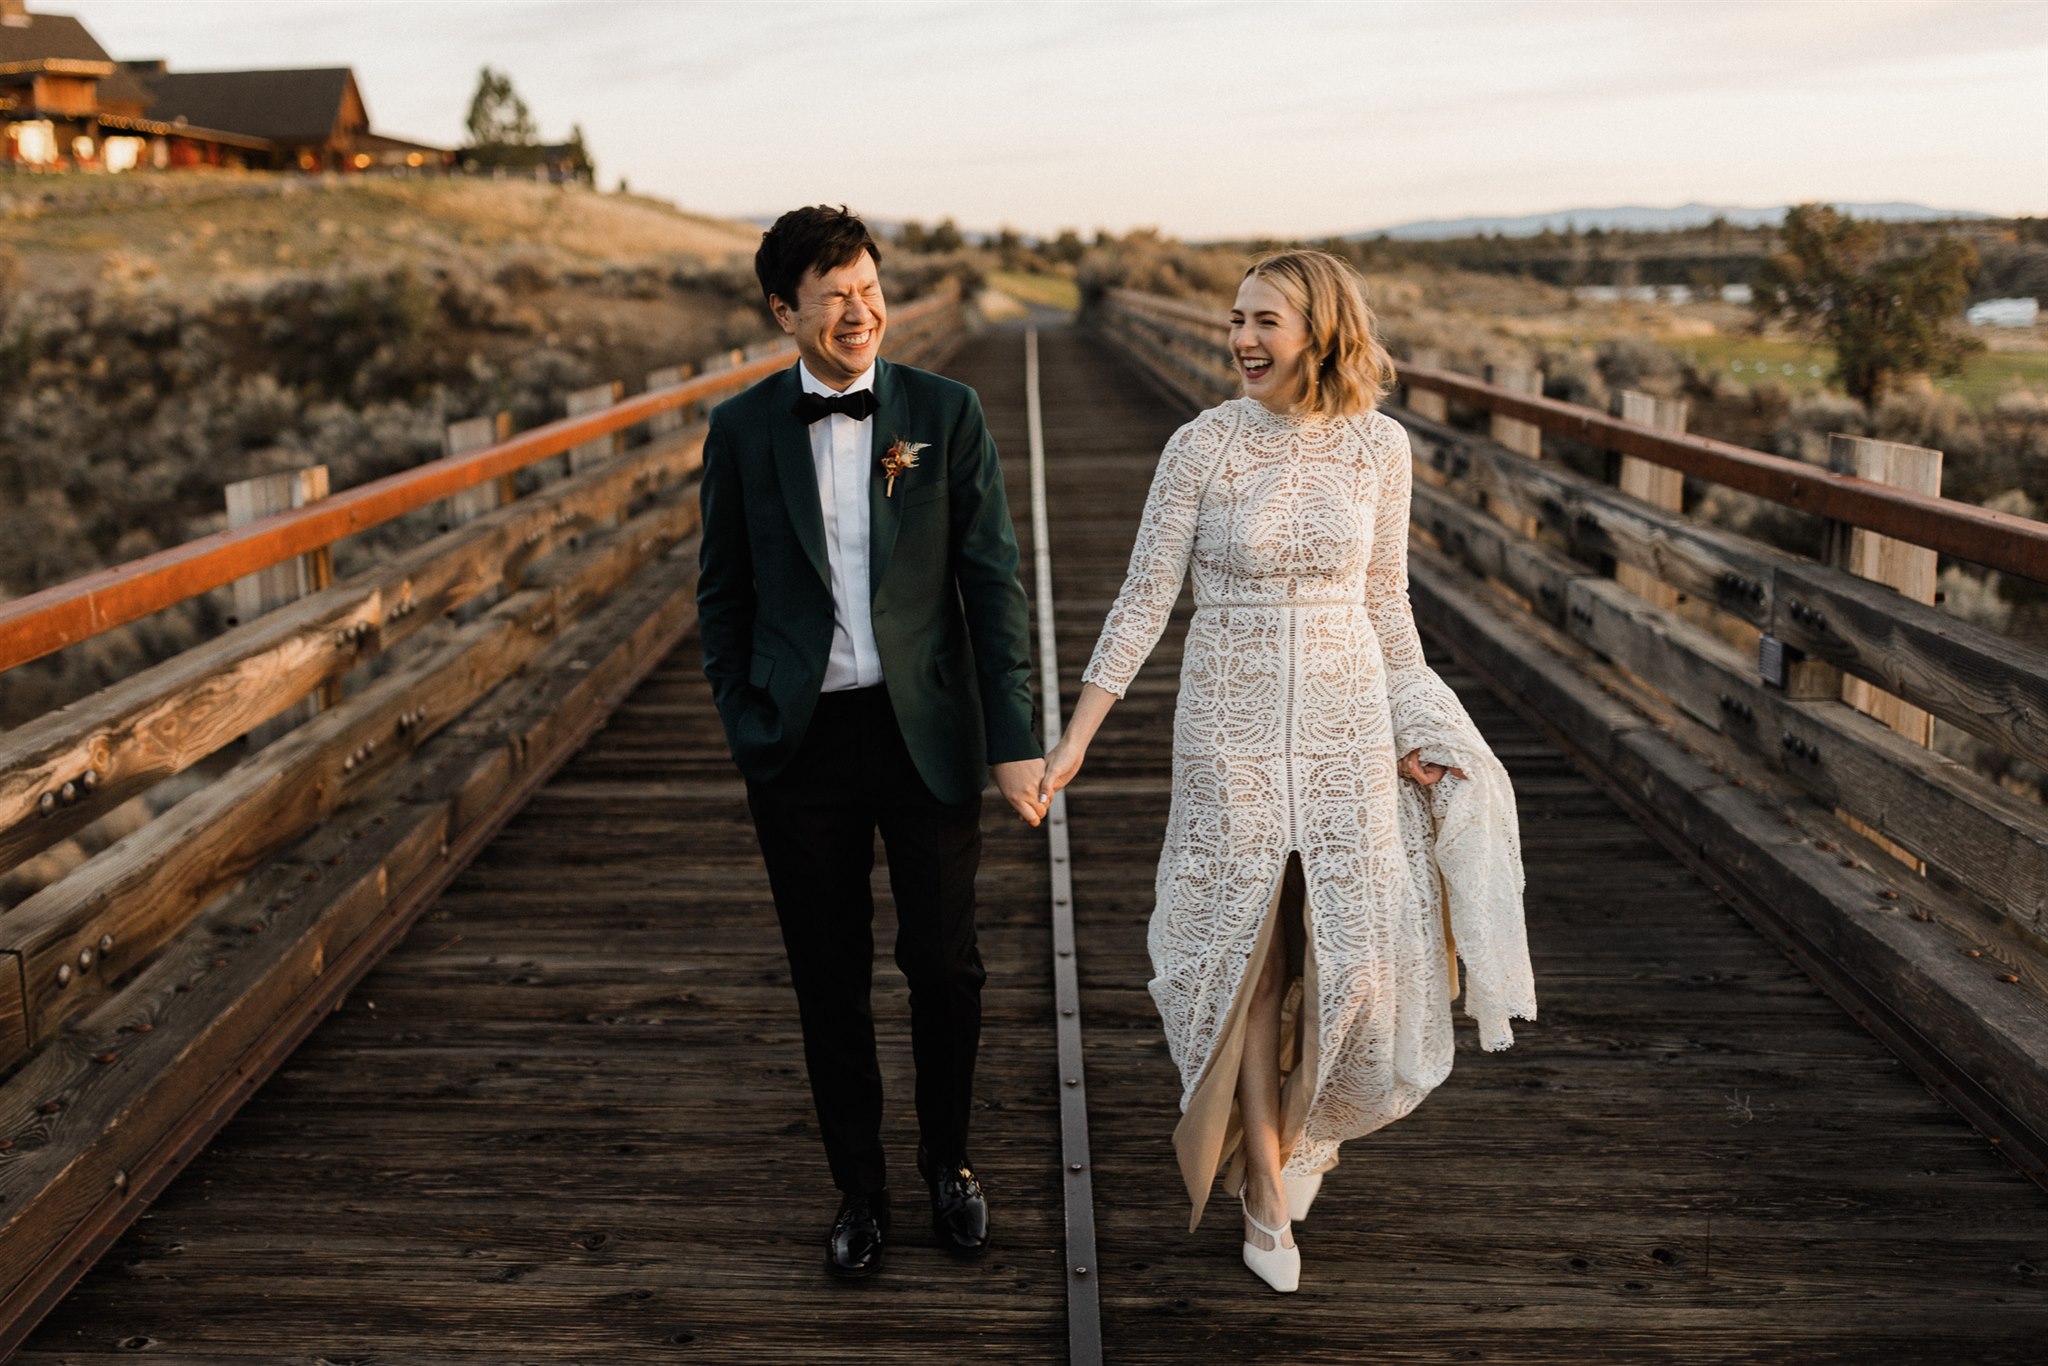 couple holding hands walking on a bridge, bride in white wedding dress. Groom in a suite